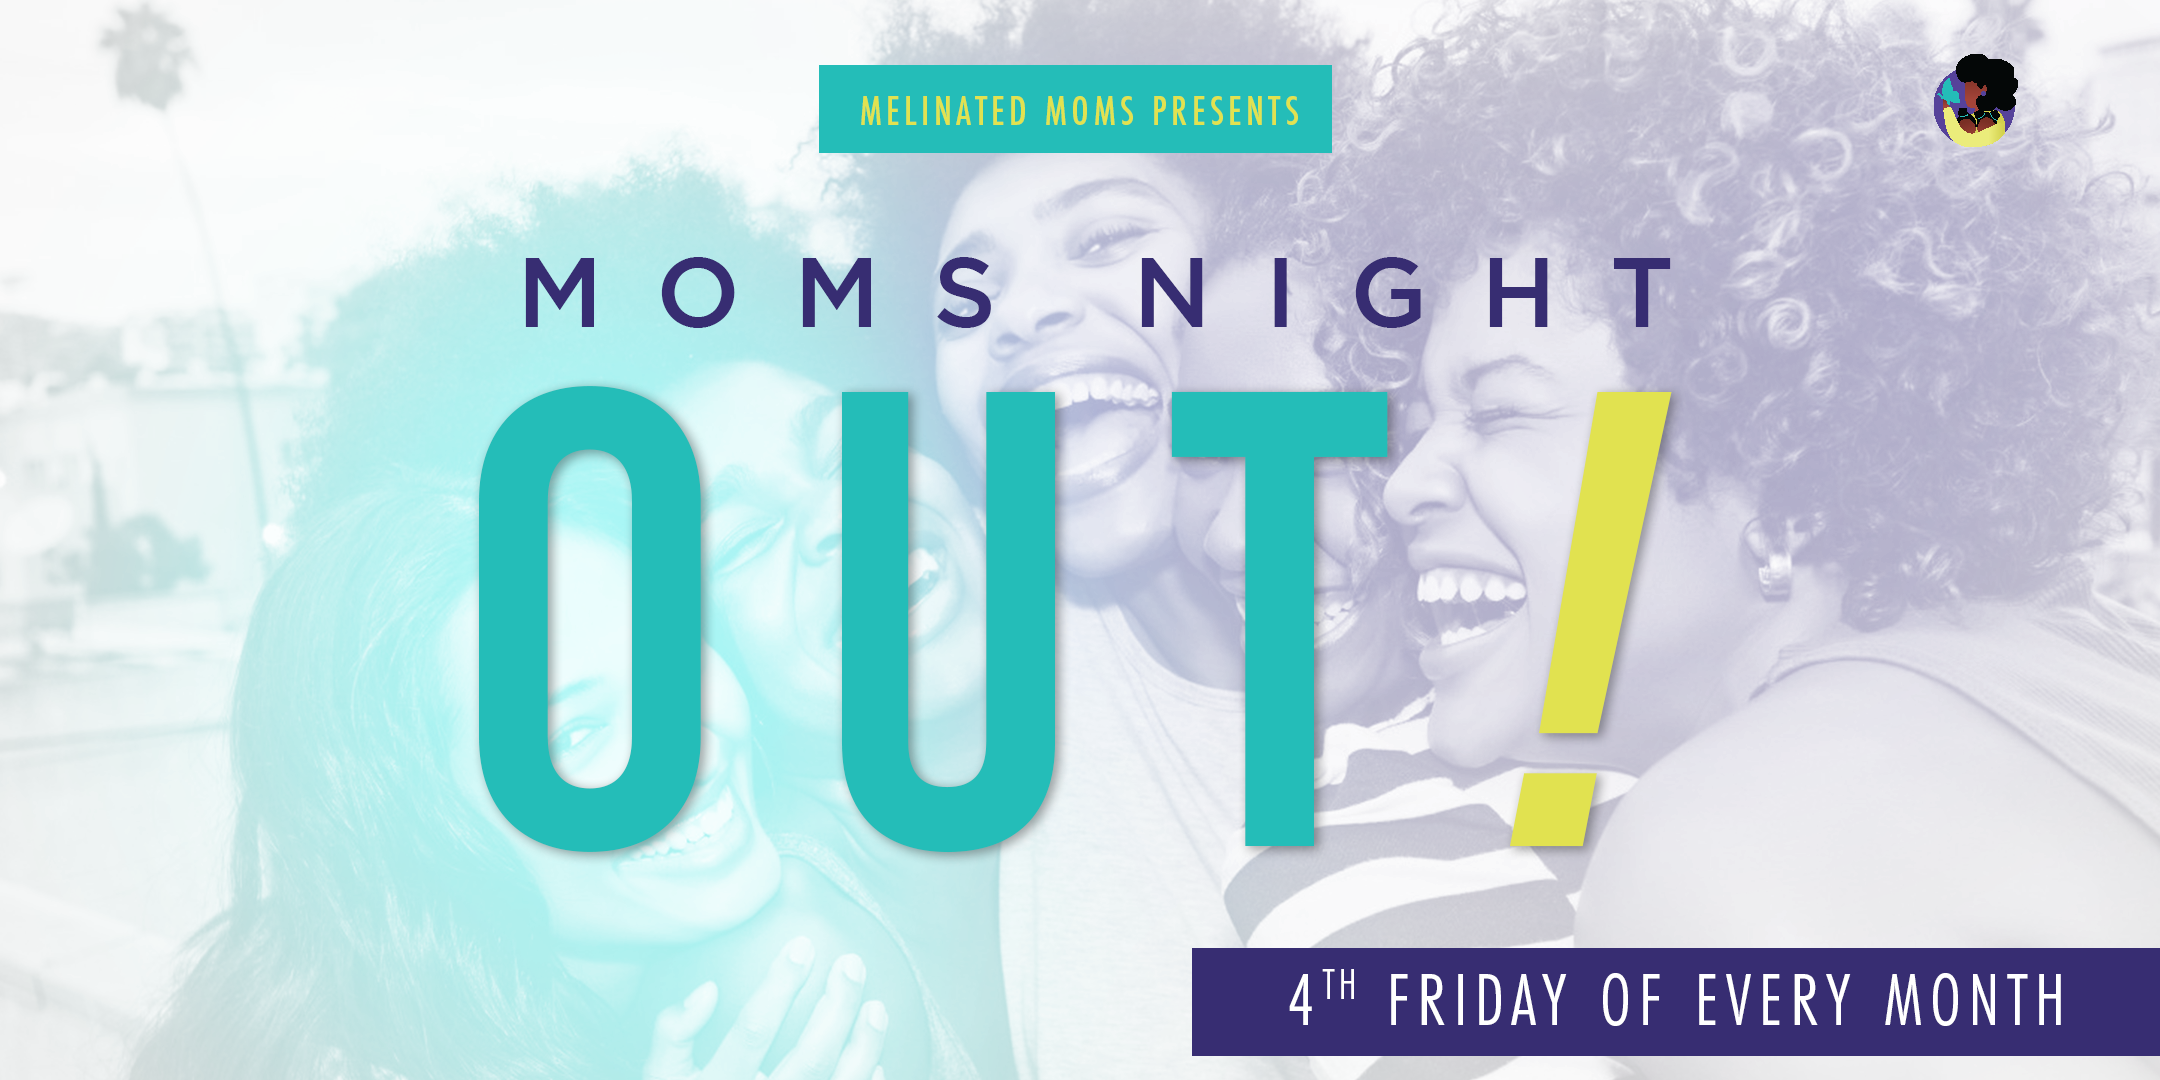 Moms Night Out! | Melinated Moms